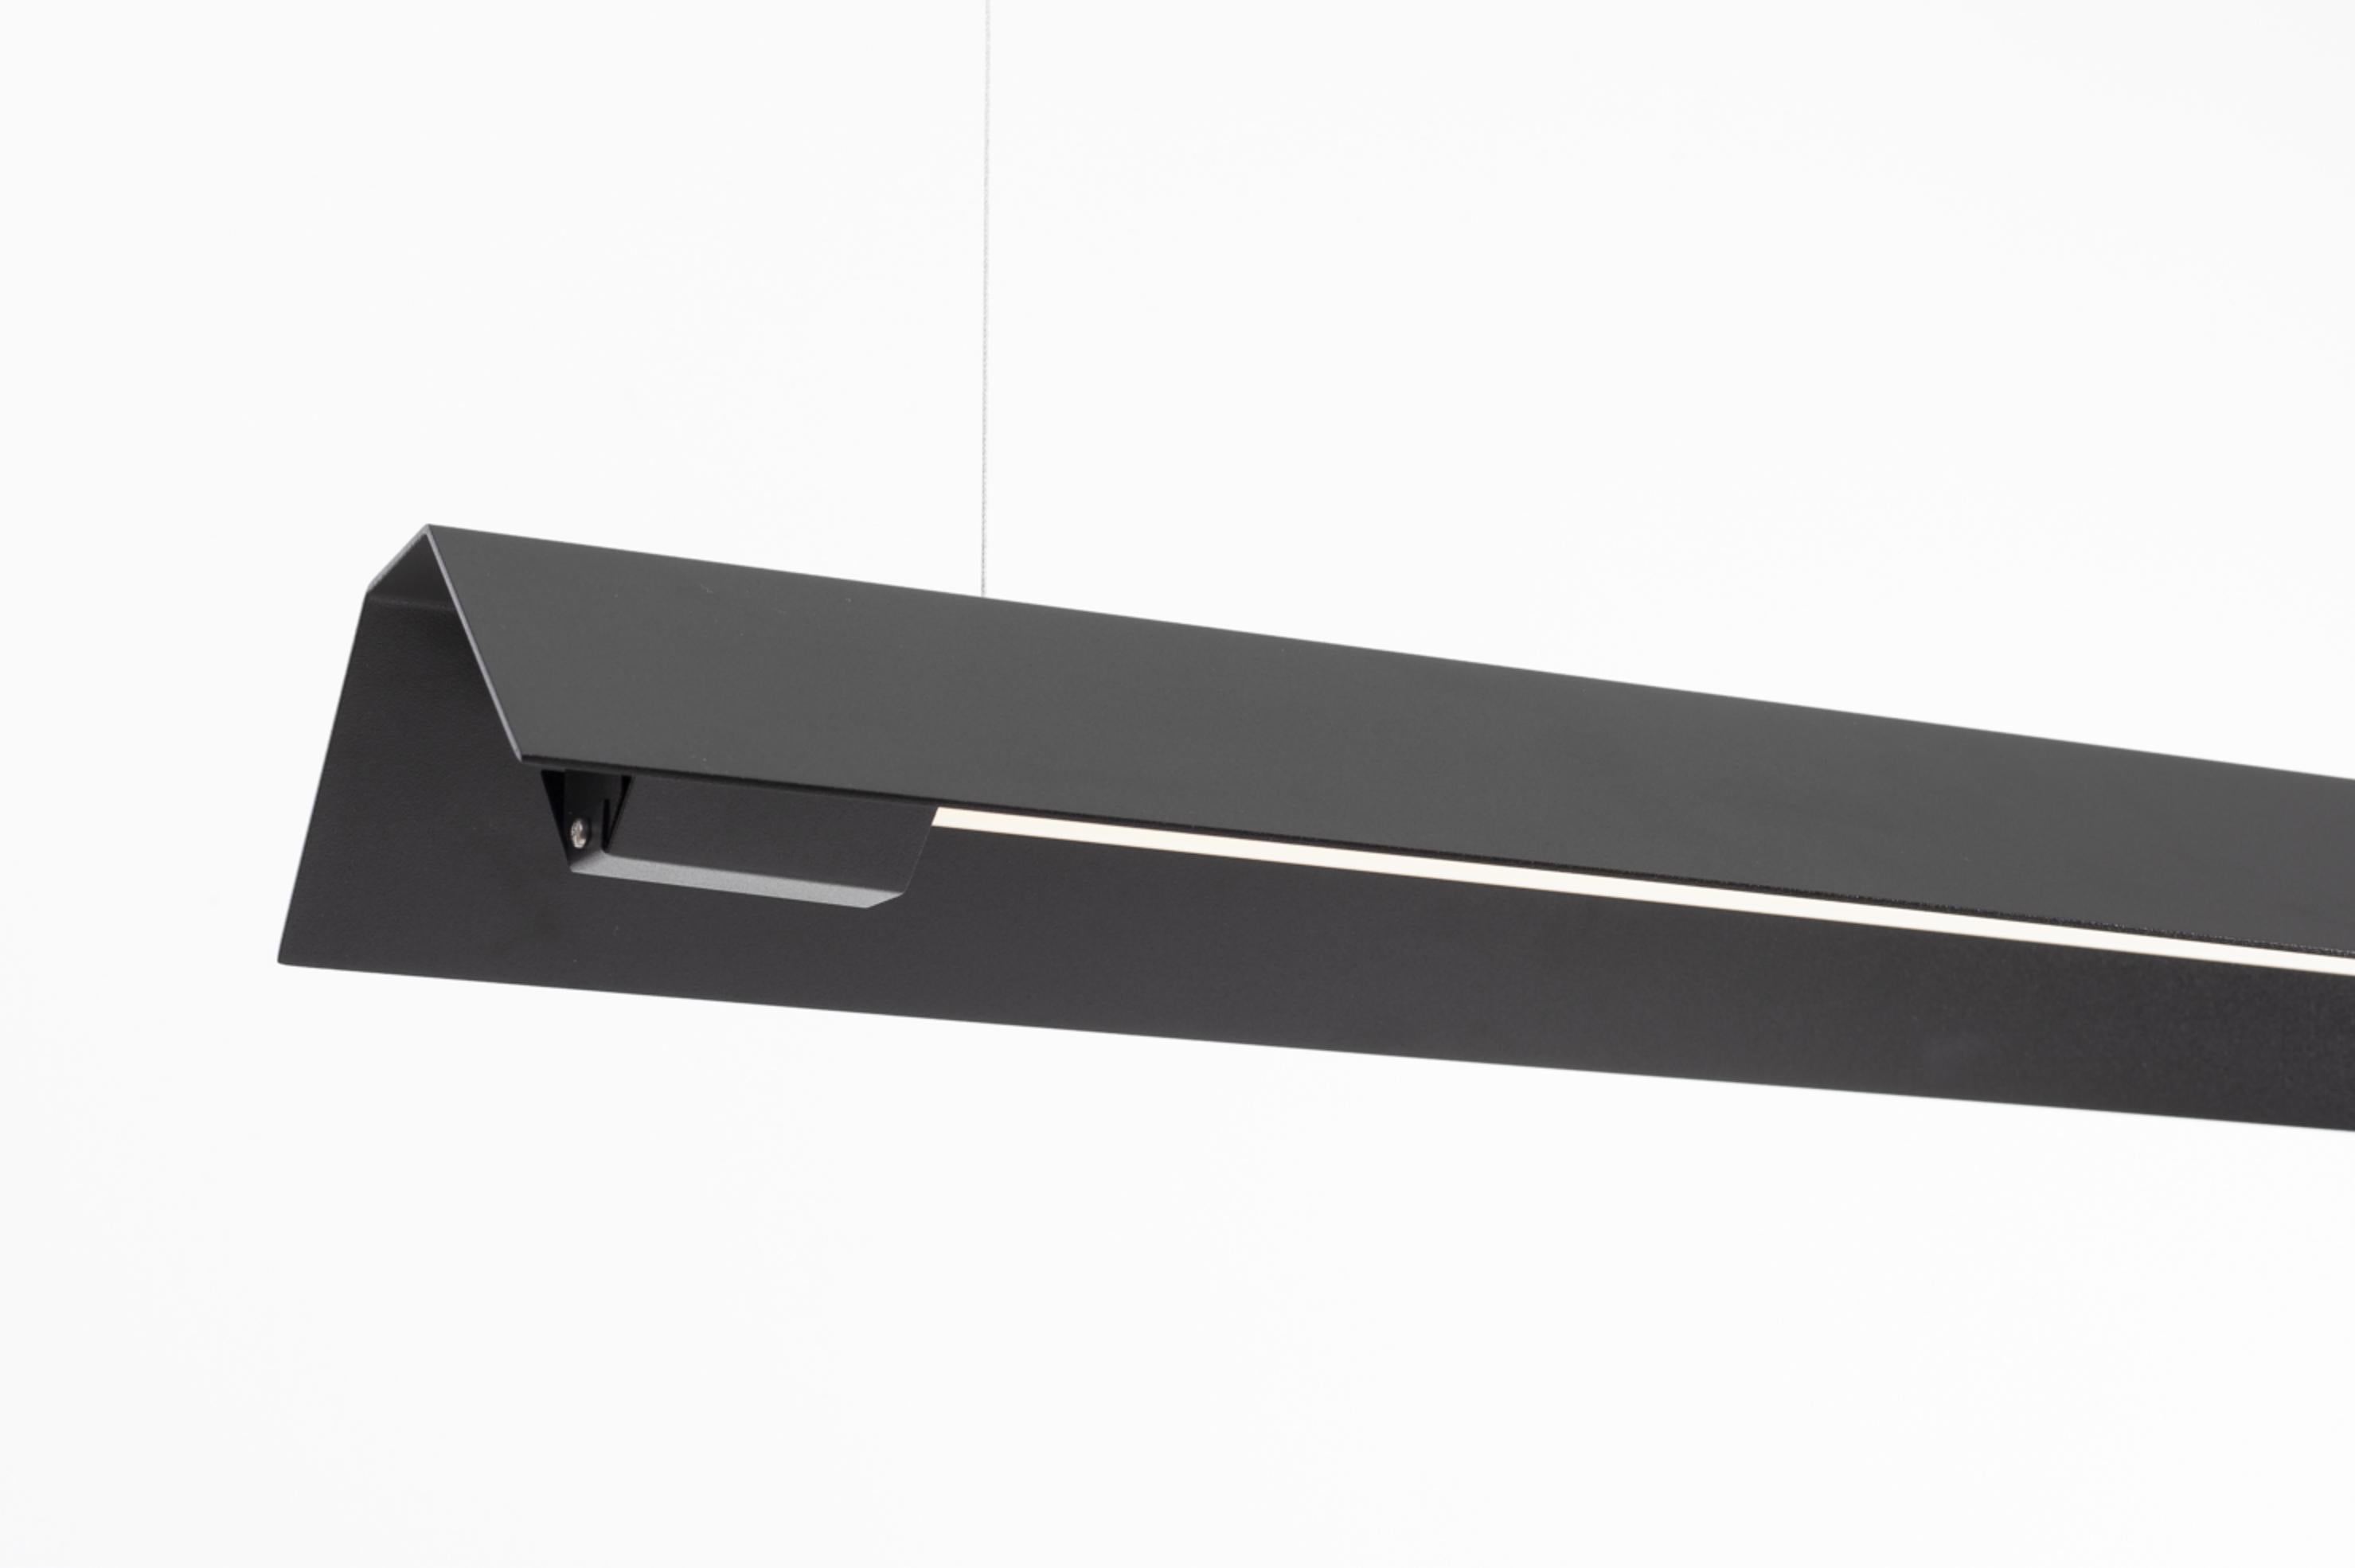 Extra Large Misalliance Ral jet black suspended light by Lexavala
Dimensions: D 16 x W 160 x H 8 cm
Materials: powder coated aluminium.

There are two lenghts of socket covers, extending over the LED. Two short are to be found in Suspended and